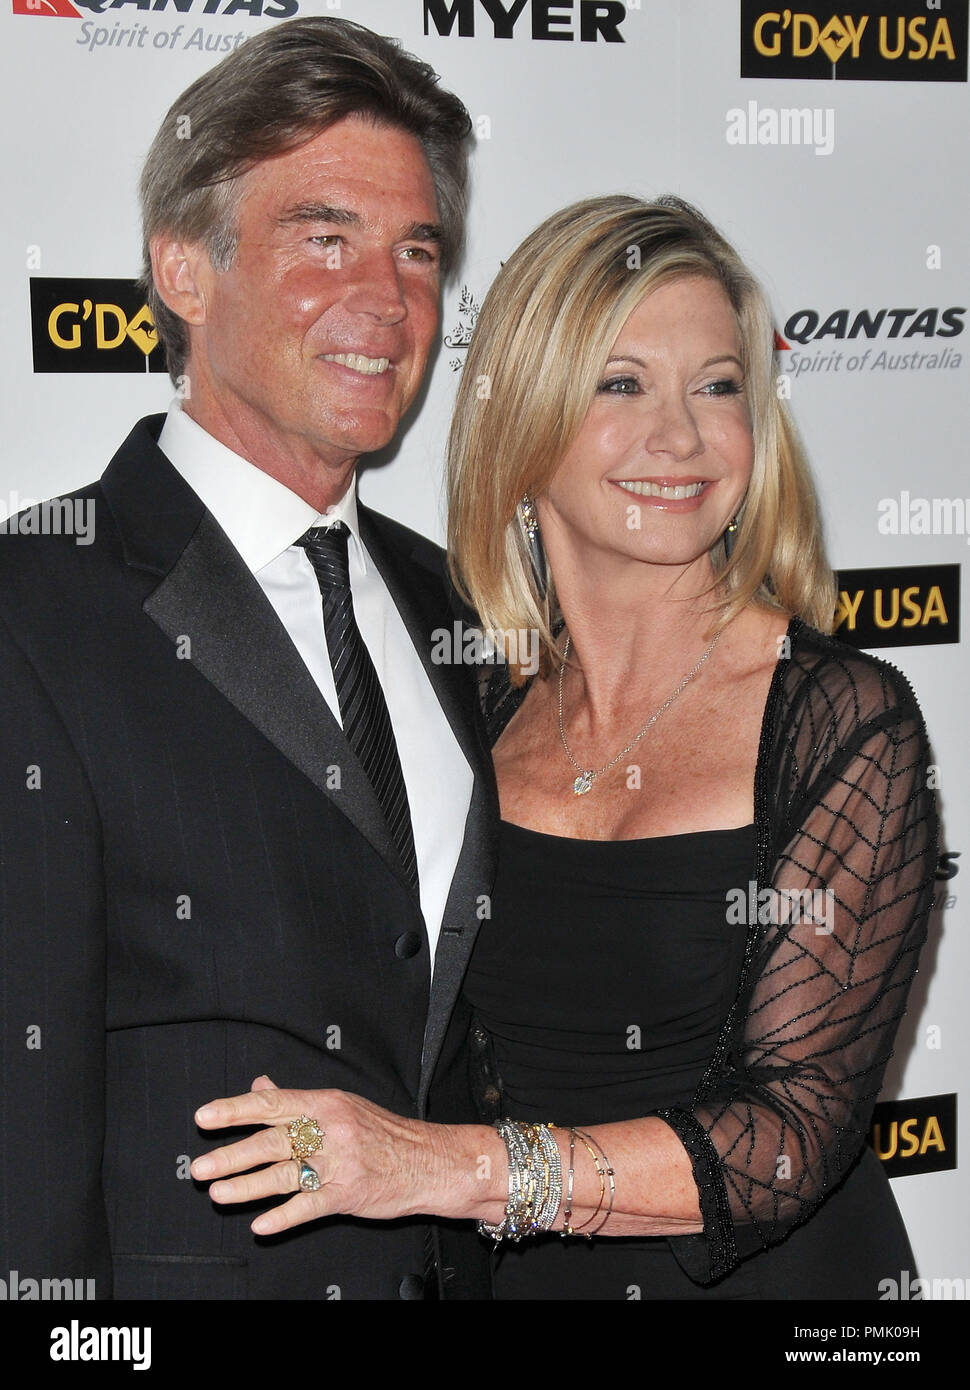 John Easterling & Olivia Newton John at the 2011 G'Day USA Los Angeles Black Tie Gala held at The Hollywood Palladium in Hollywood, CA. The event took place on Saturday, January 22, 2011. Photo by PRPP/ PictureLux Stock Photo